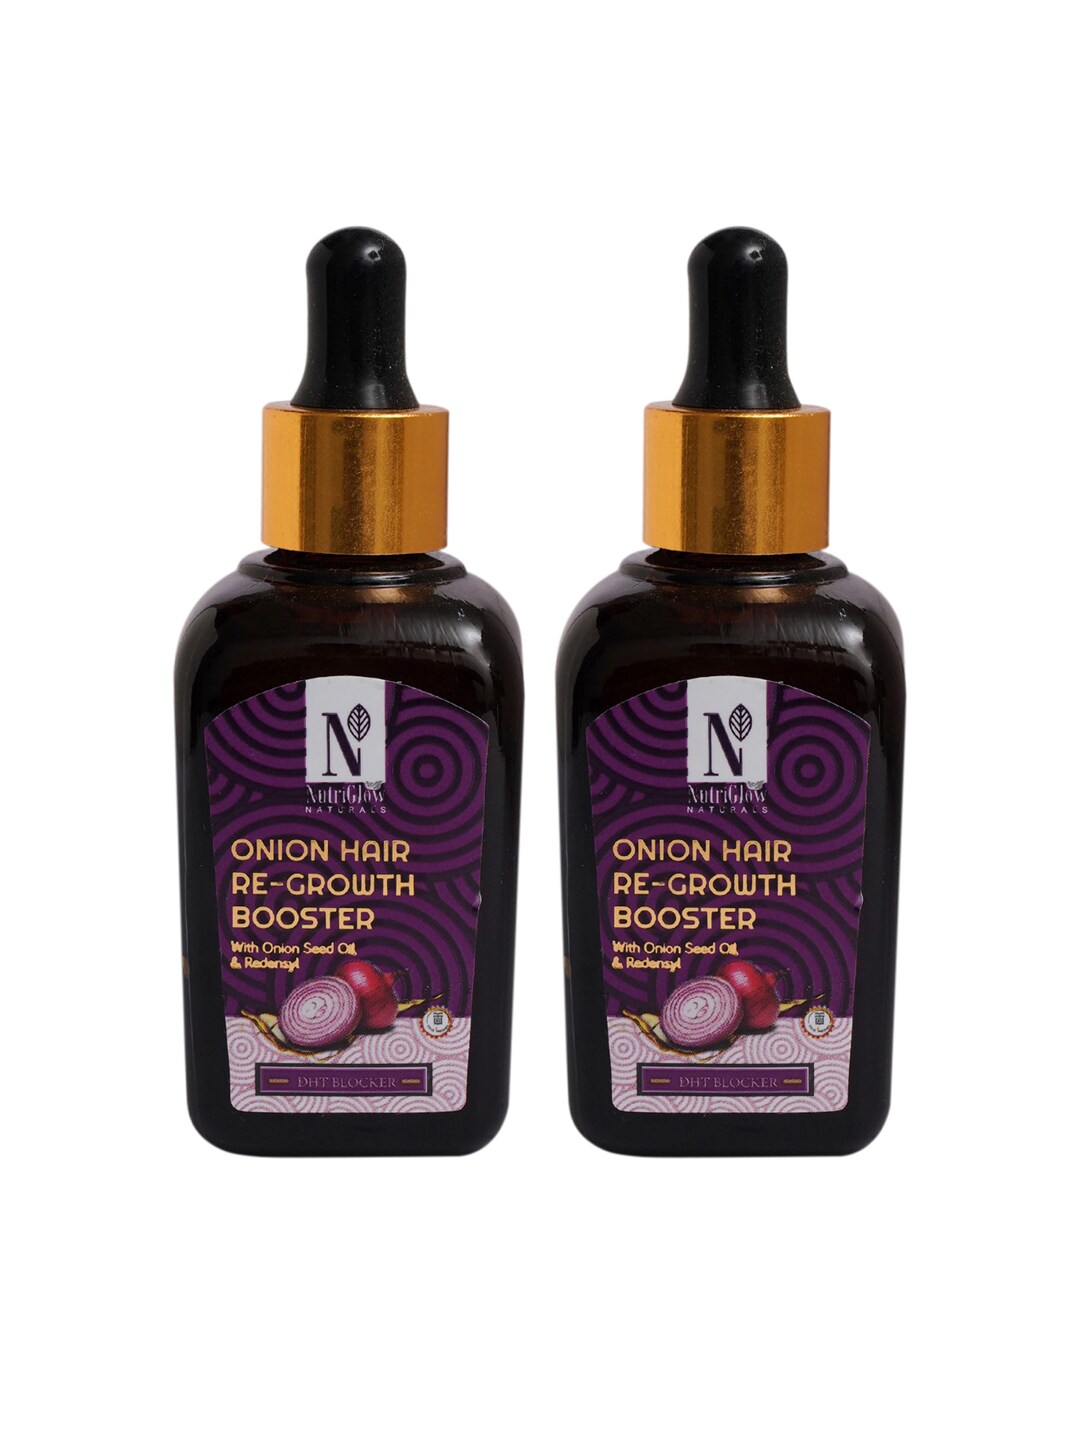 NutriGlow NATURAL's Pack of 2 Onion Hair Re-growth Booster (2 X 50ml) Price in India